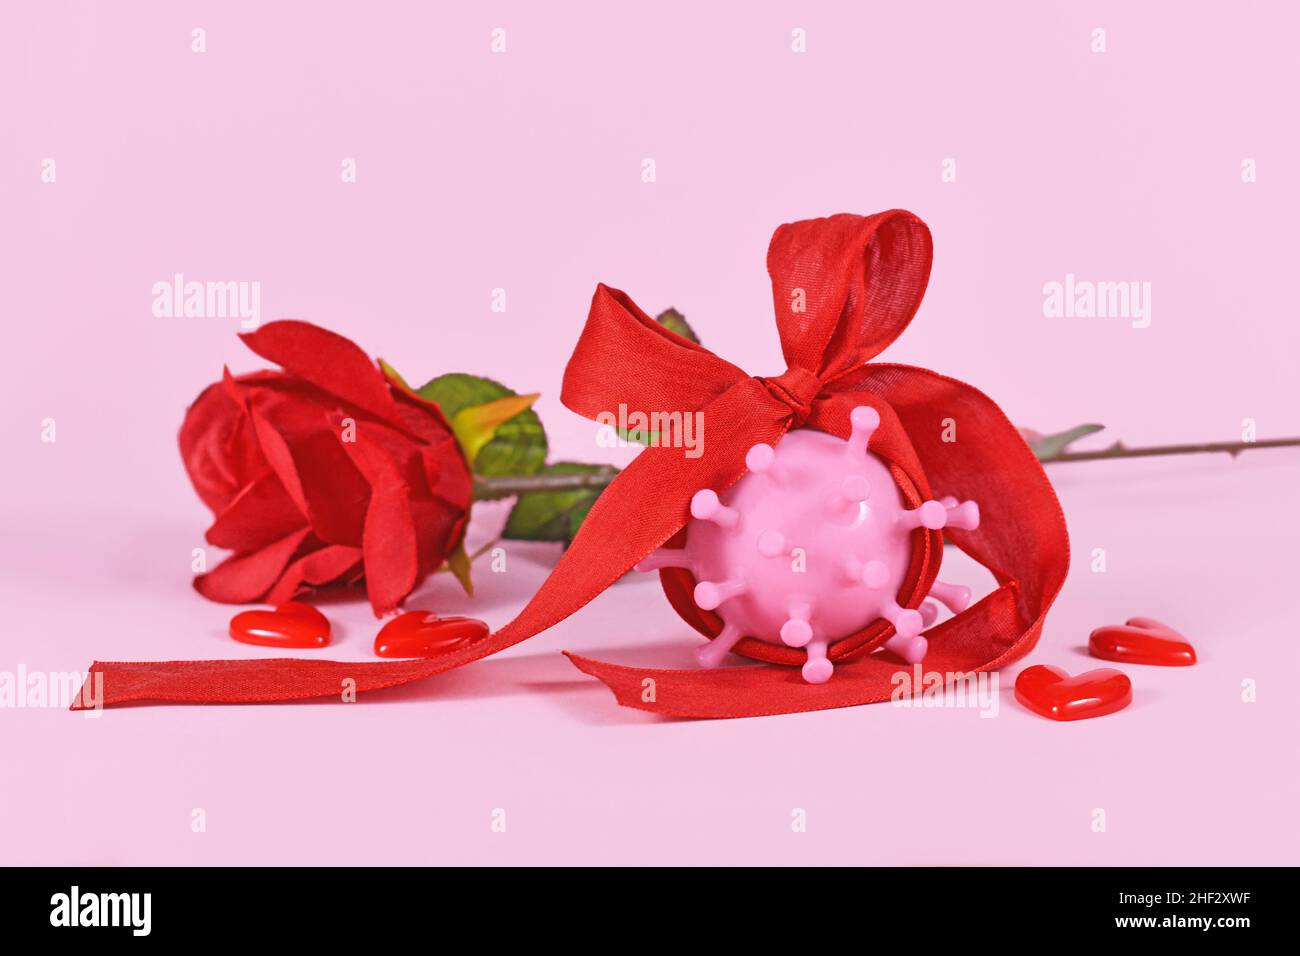 Valentine's day during Corona pandemic concept with virus model wrapped in ribbon and rose on pink background Stock Photo